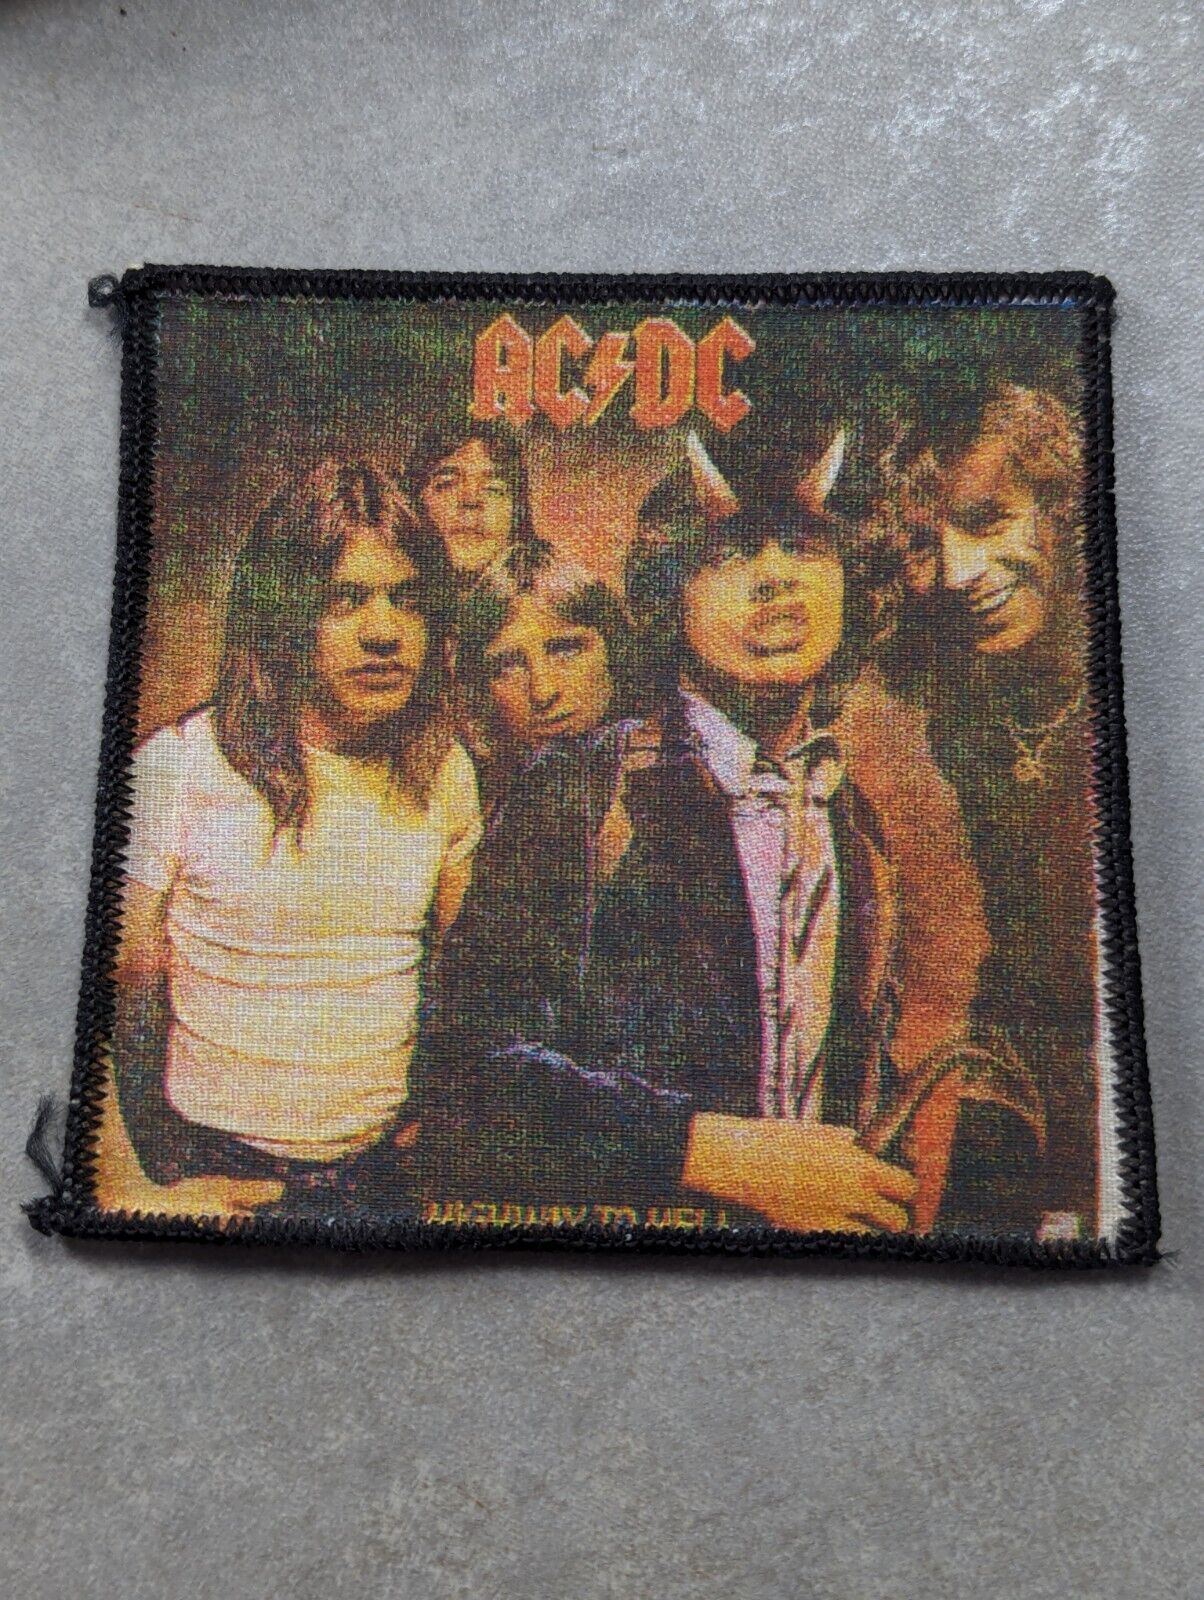 VINTAGE ACDC Iron on / Sew on Patch Purchased Around 1986